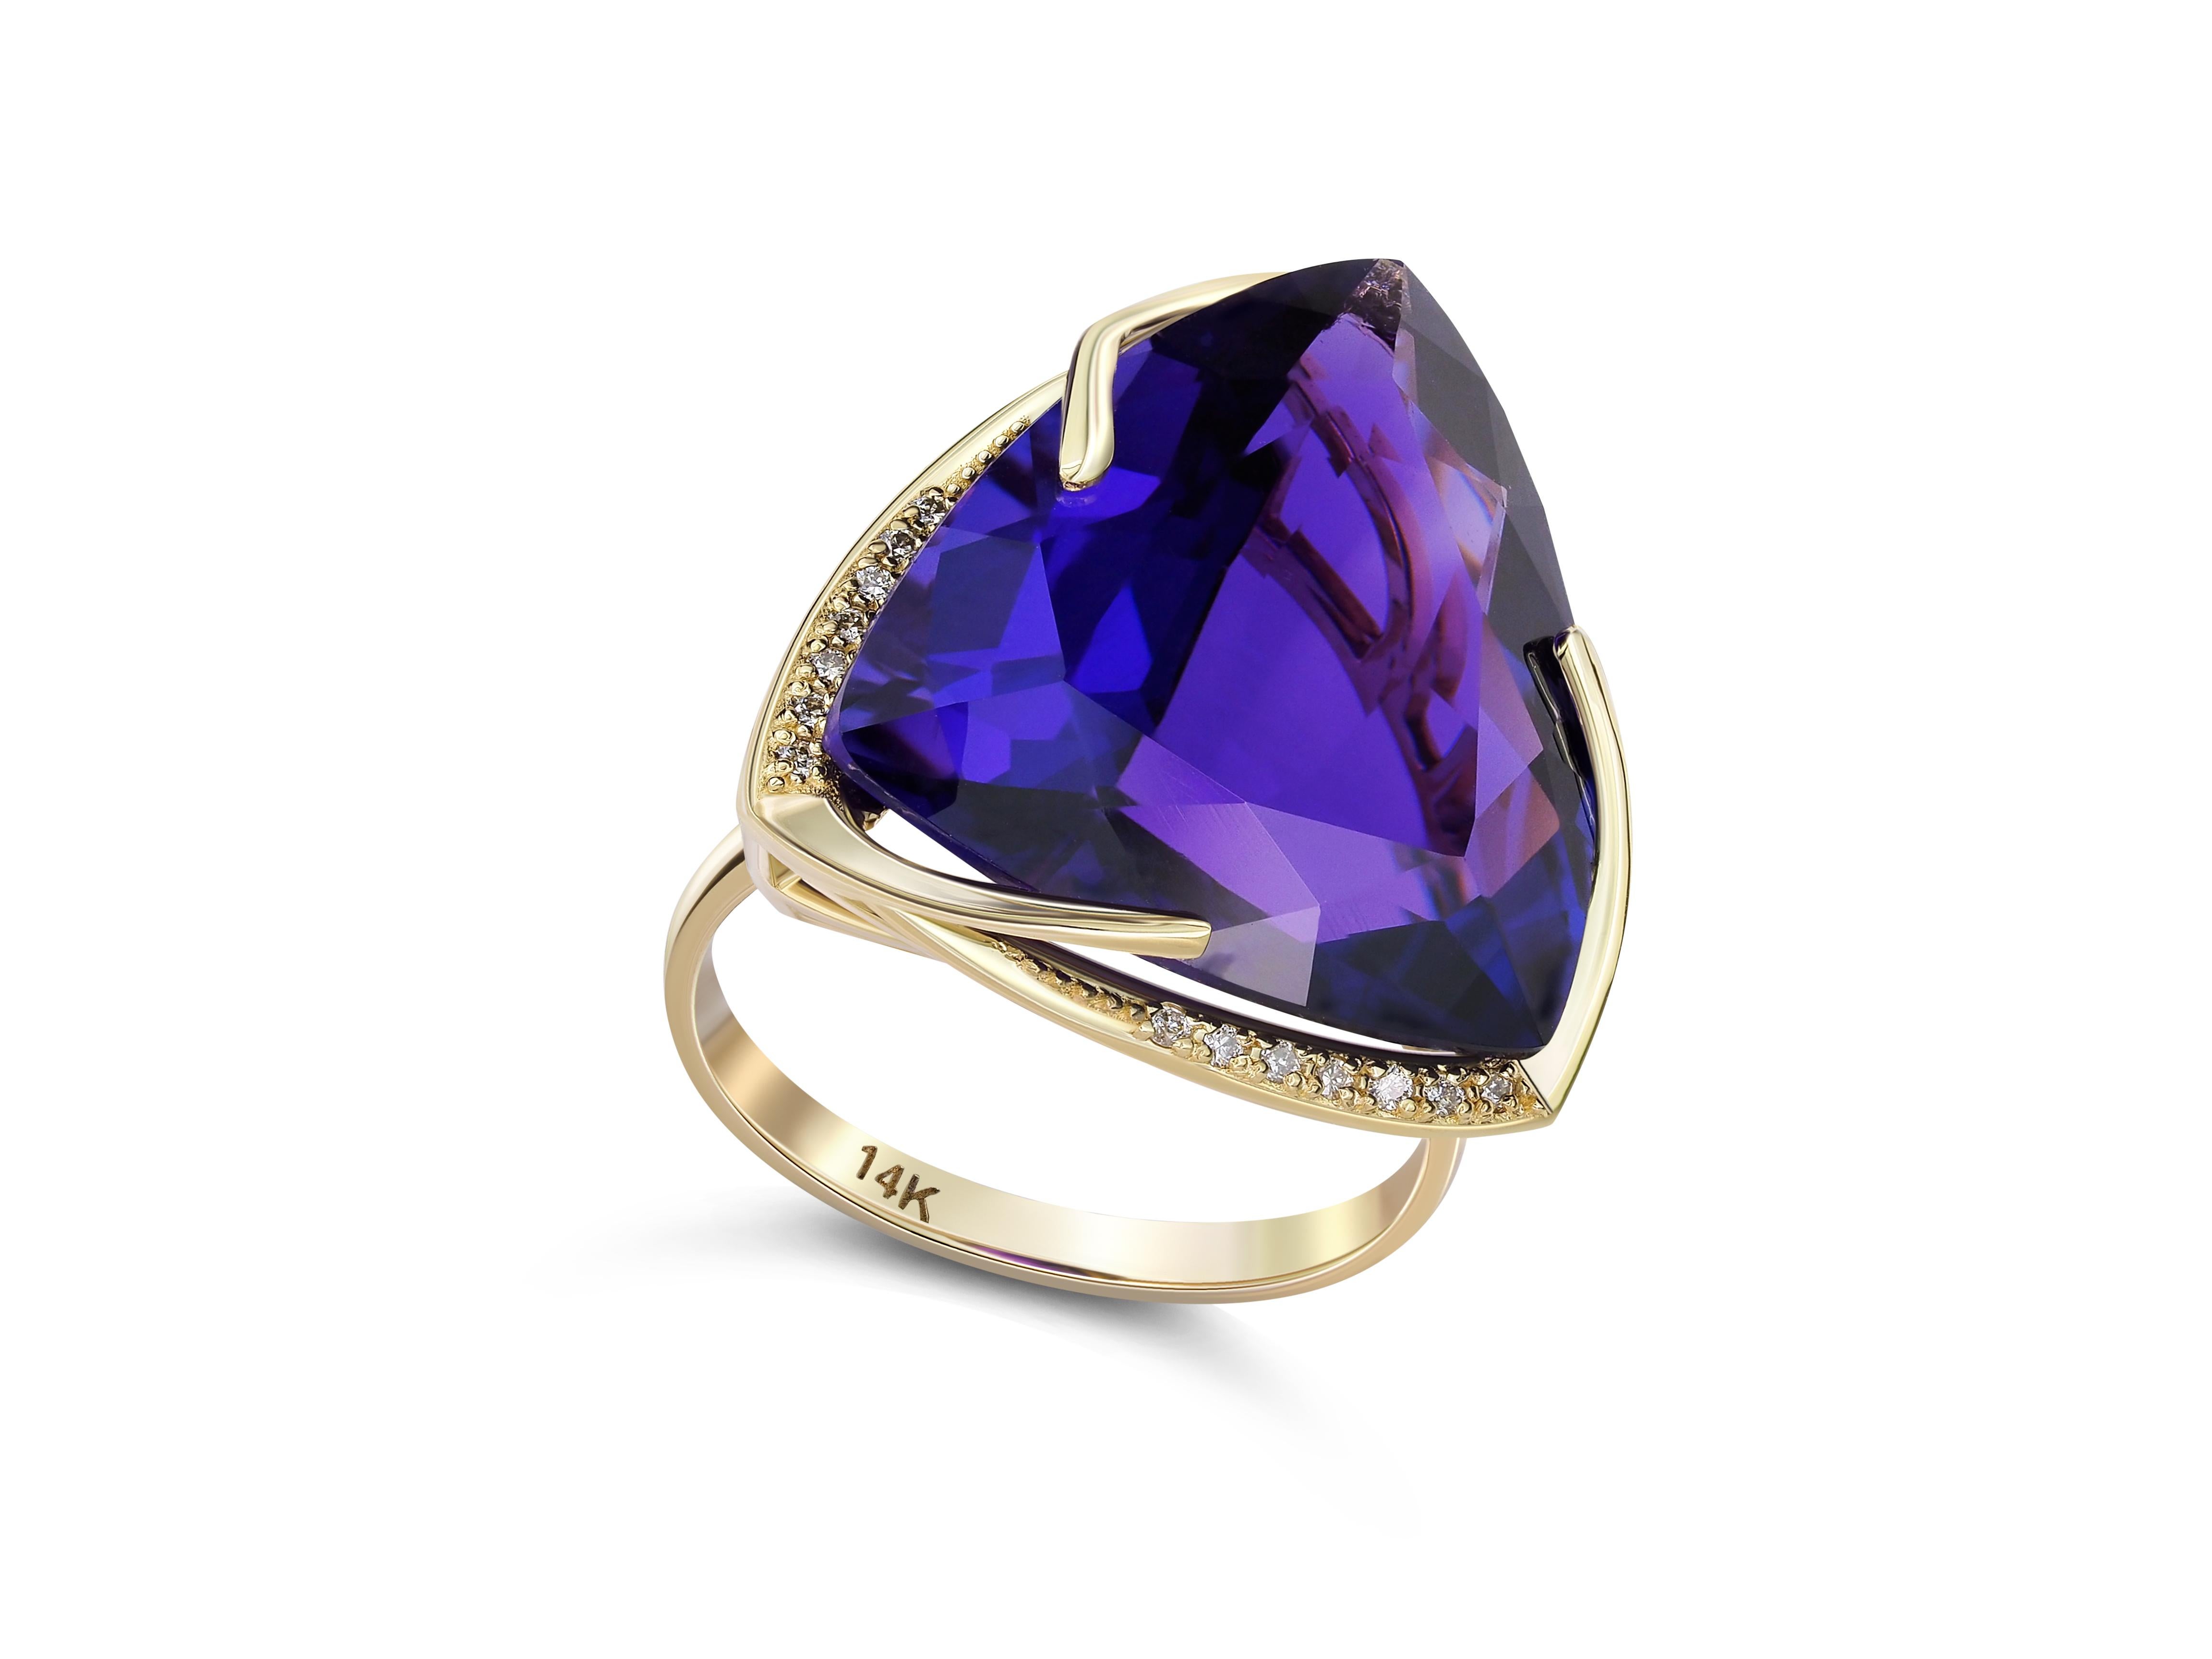 14 Karat Gold Ring with Amethyst and Diamonds, Amethyst Cocktail Ring 1